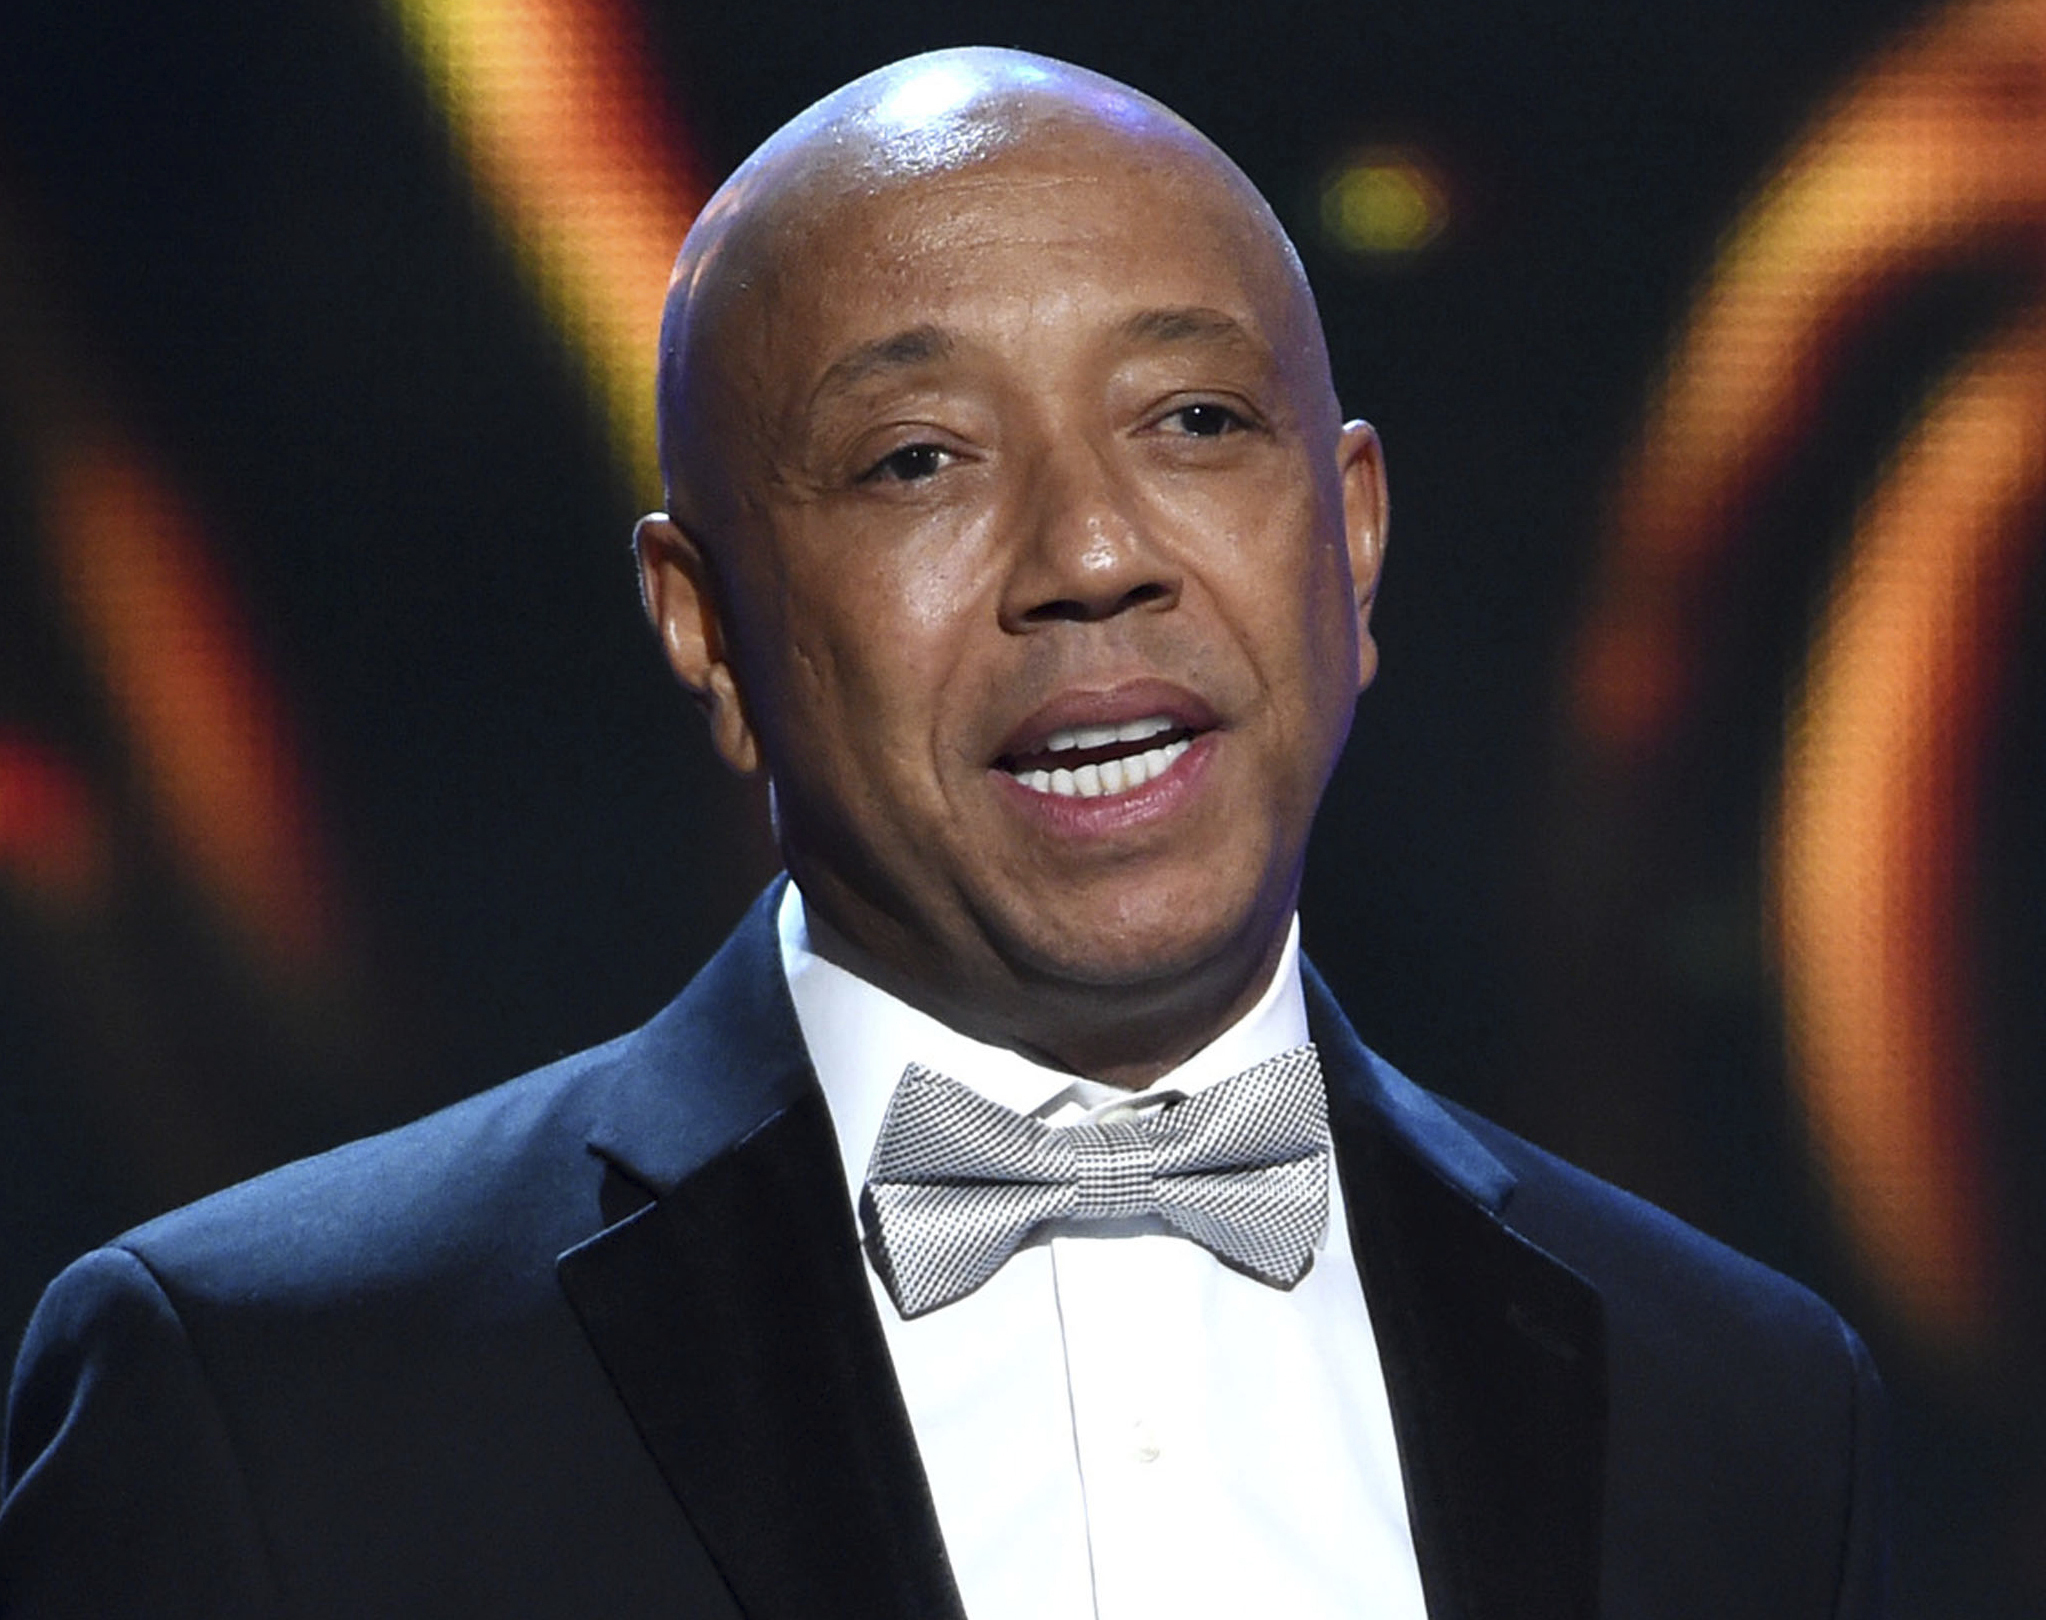 Russell Simmons presents the Vanguard Award on stage at the 46th NAACP Image Awards in Pasadena, Calif. on Feb. 6, 2015 (Chris Pizzello—Invision/AP)